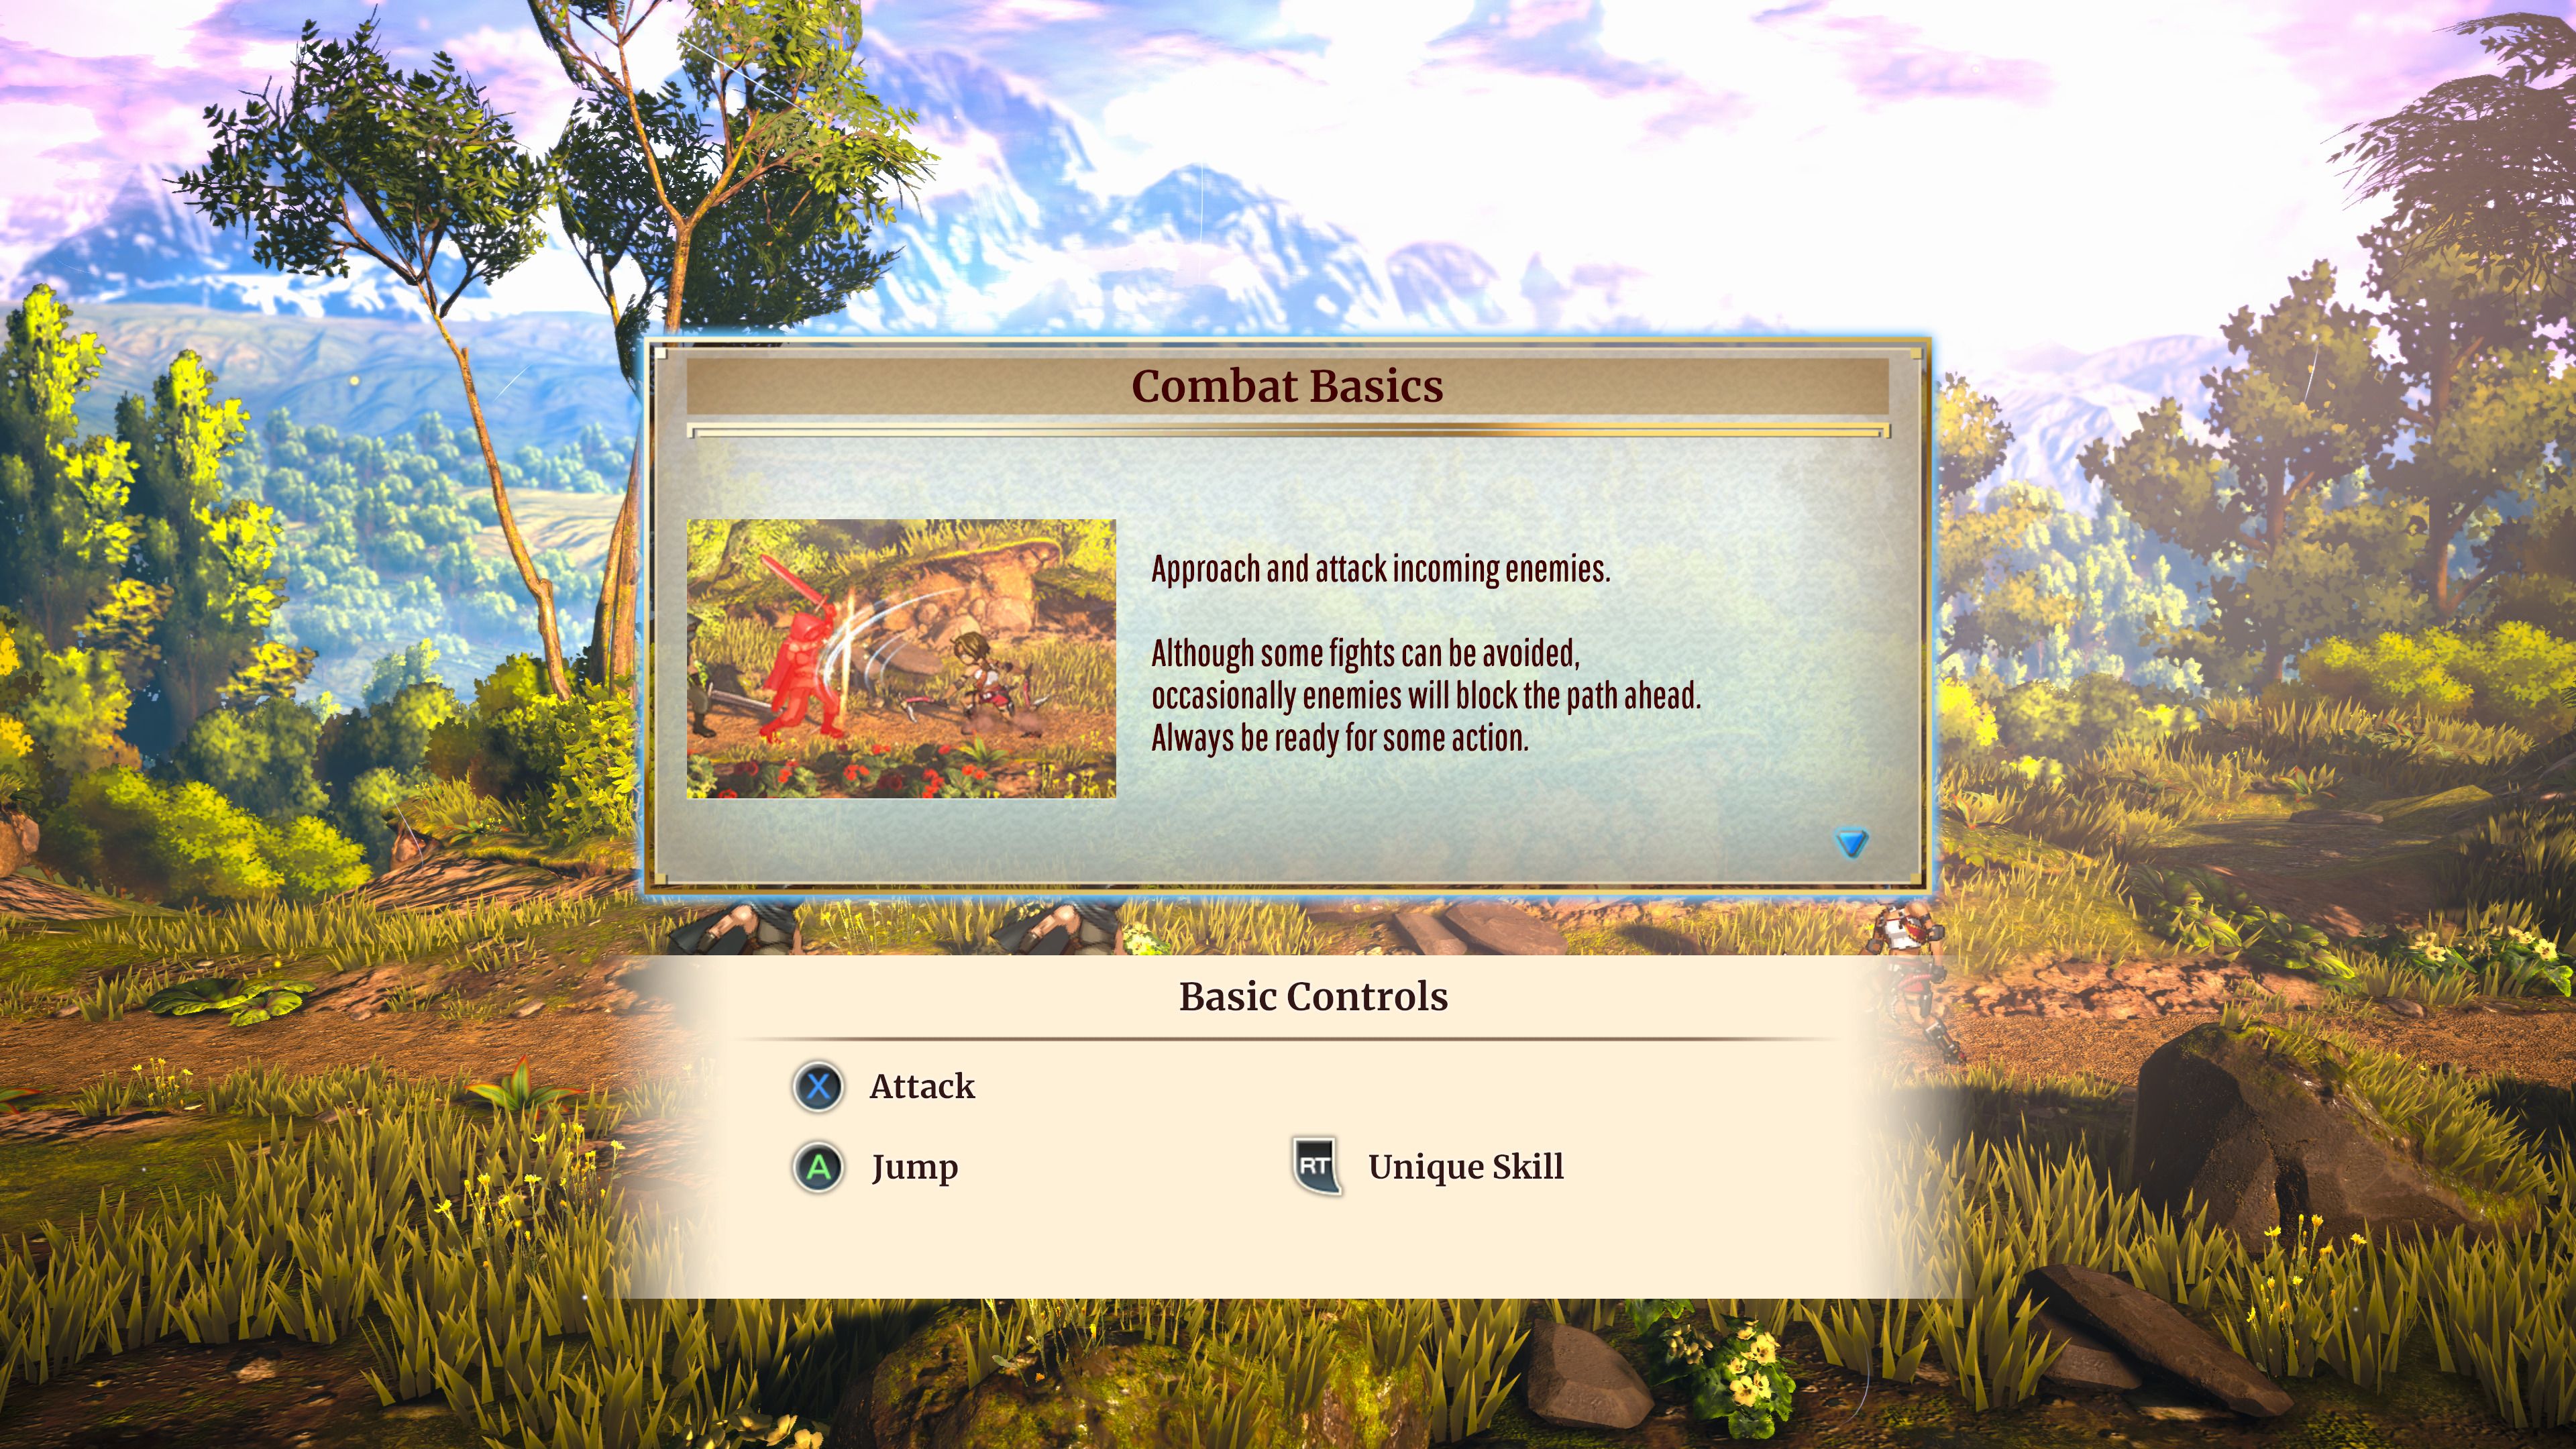 A window showing the basic controls of the game.